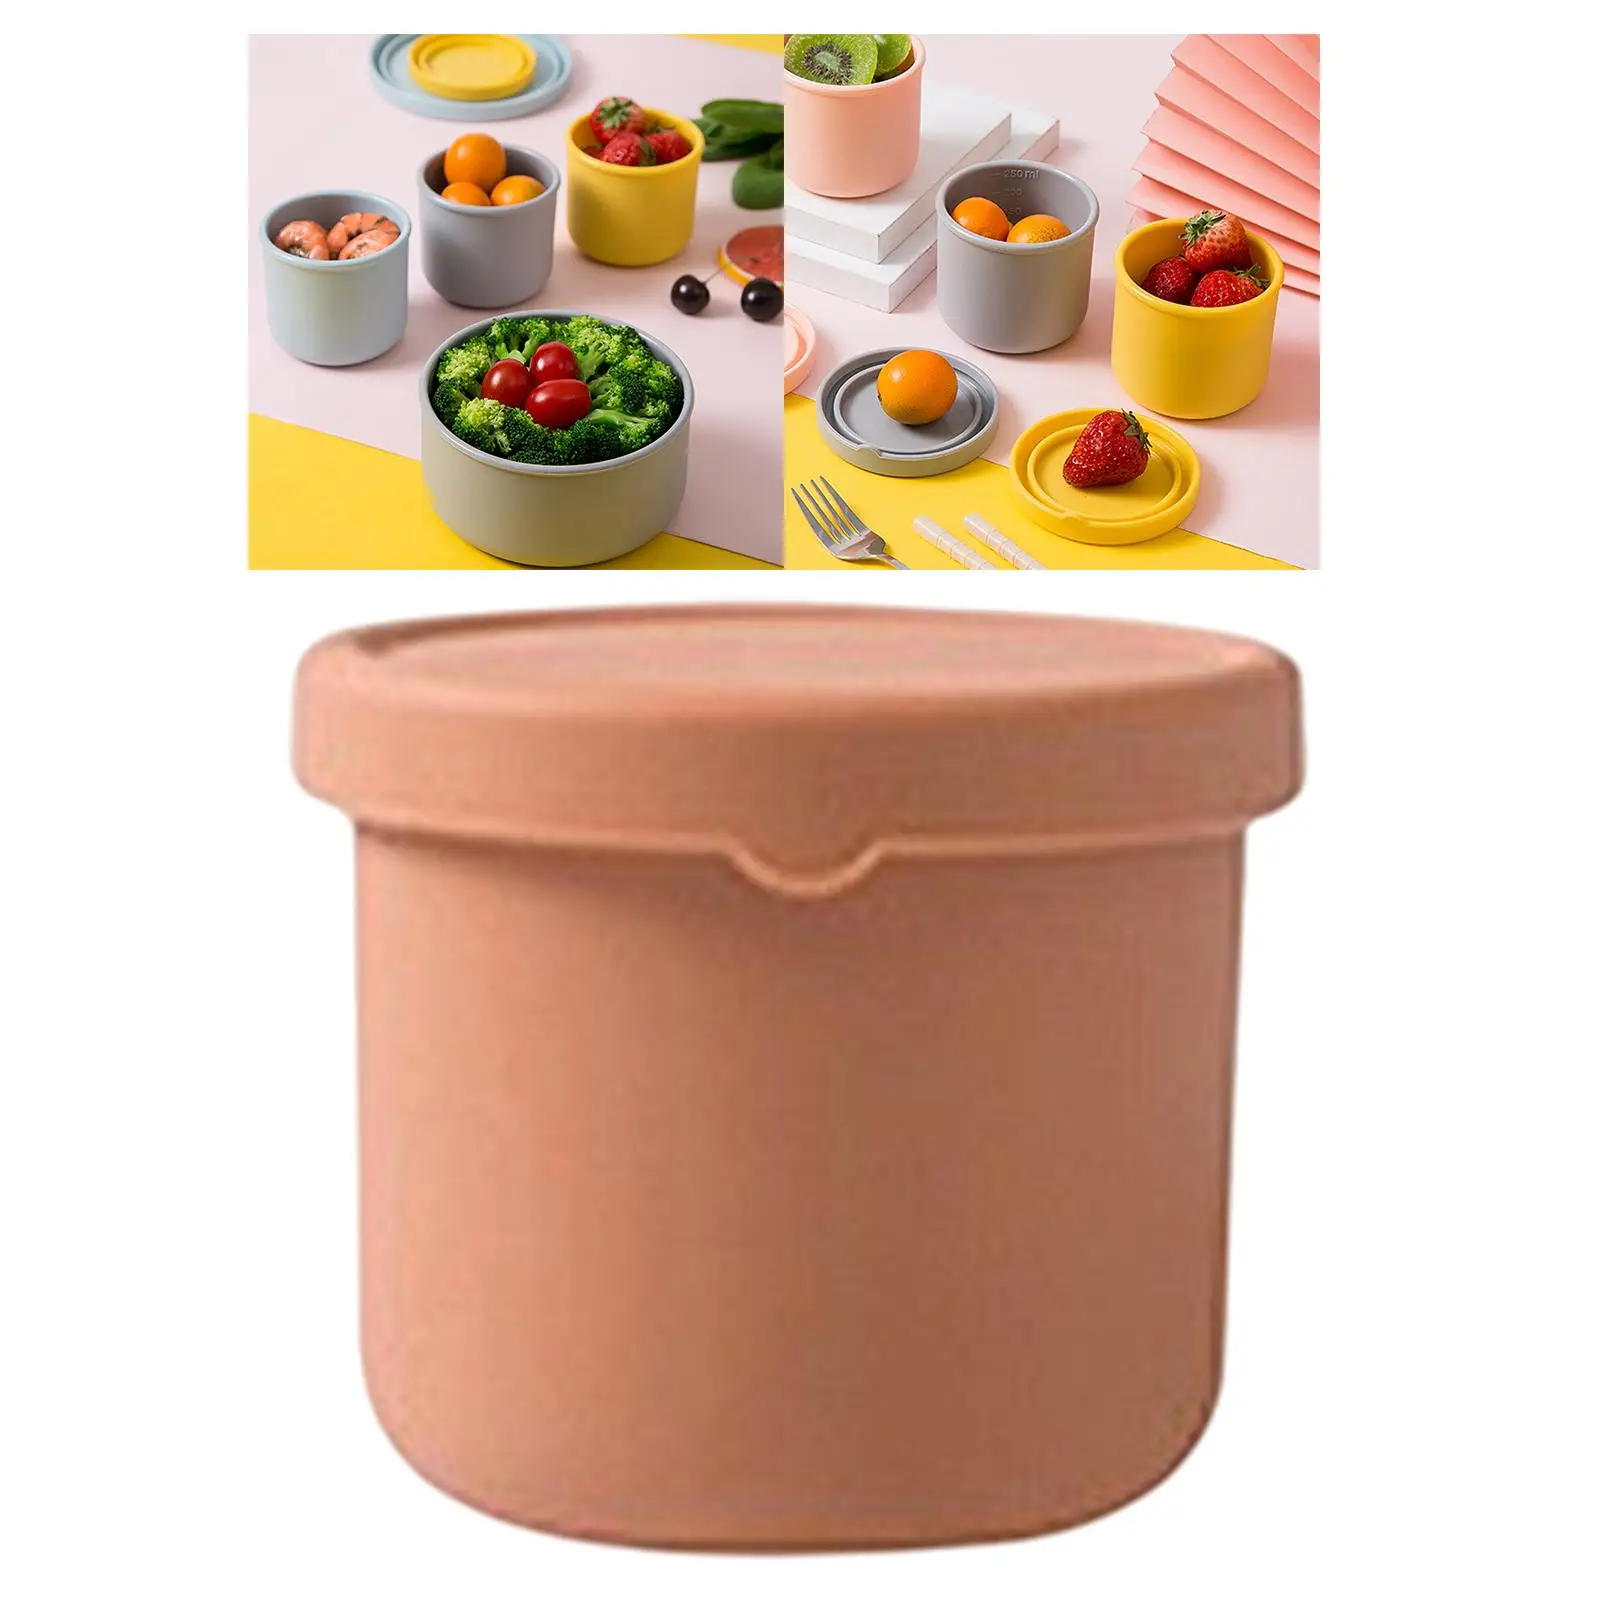 Hard Silicone Box for Lunch Leakproof Round with Lid Storage Bento Food Container Portable Single Color for Microwave